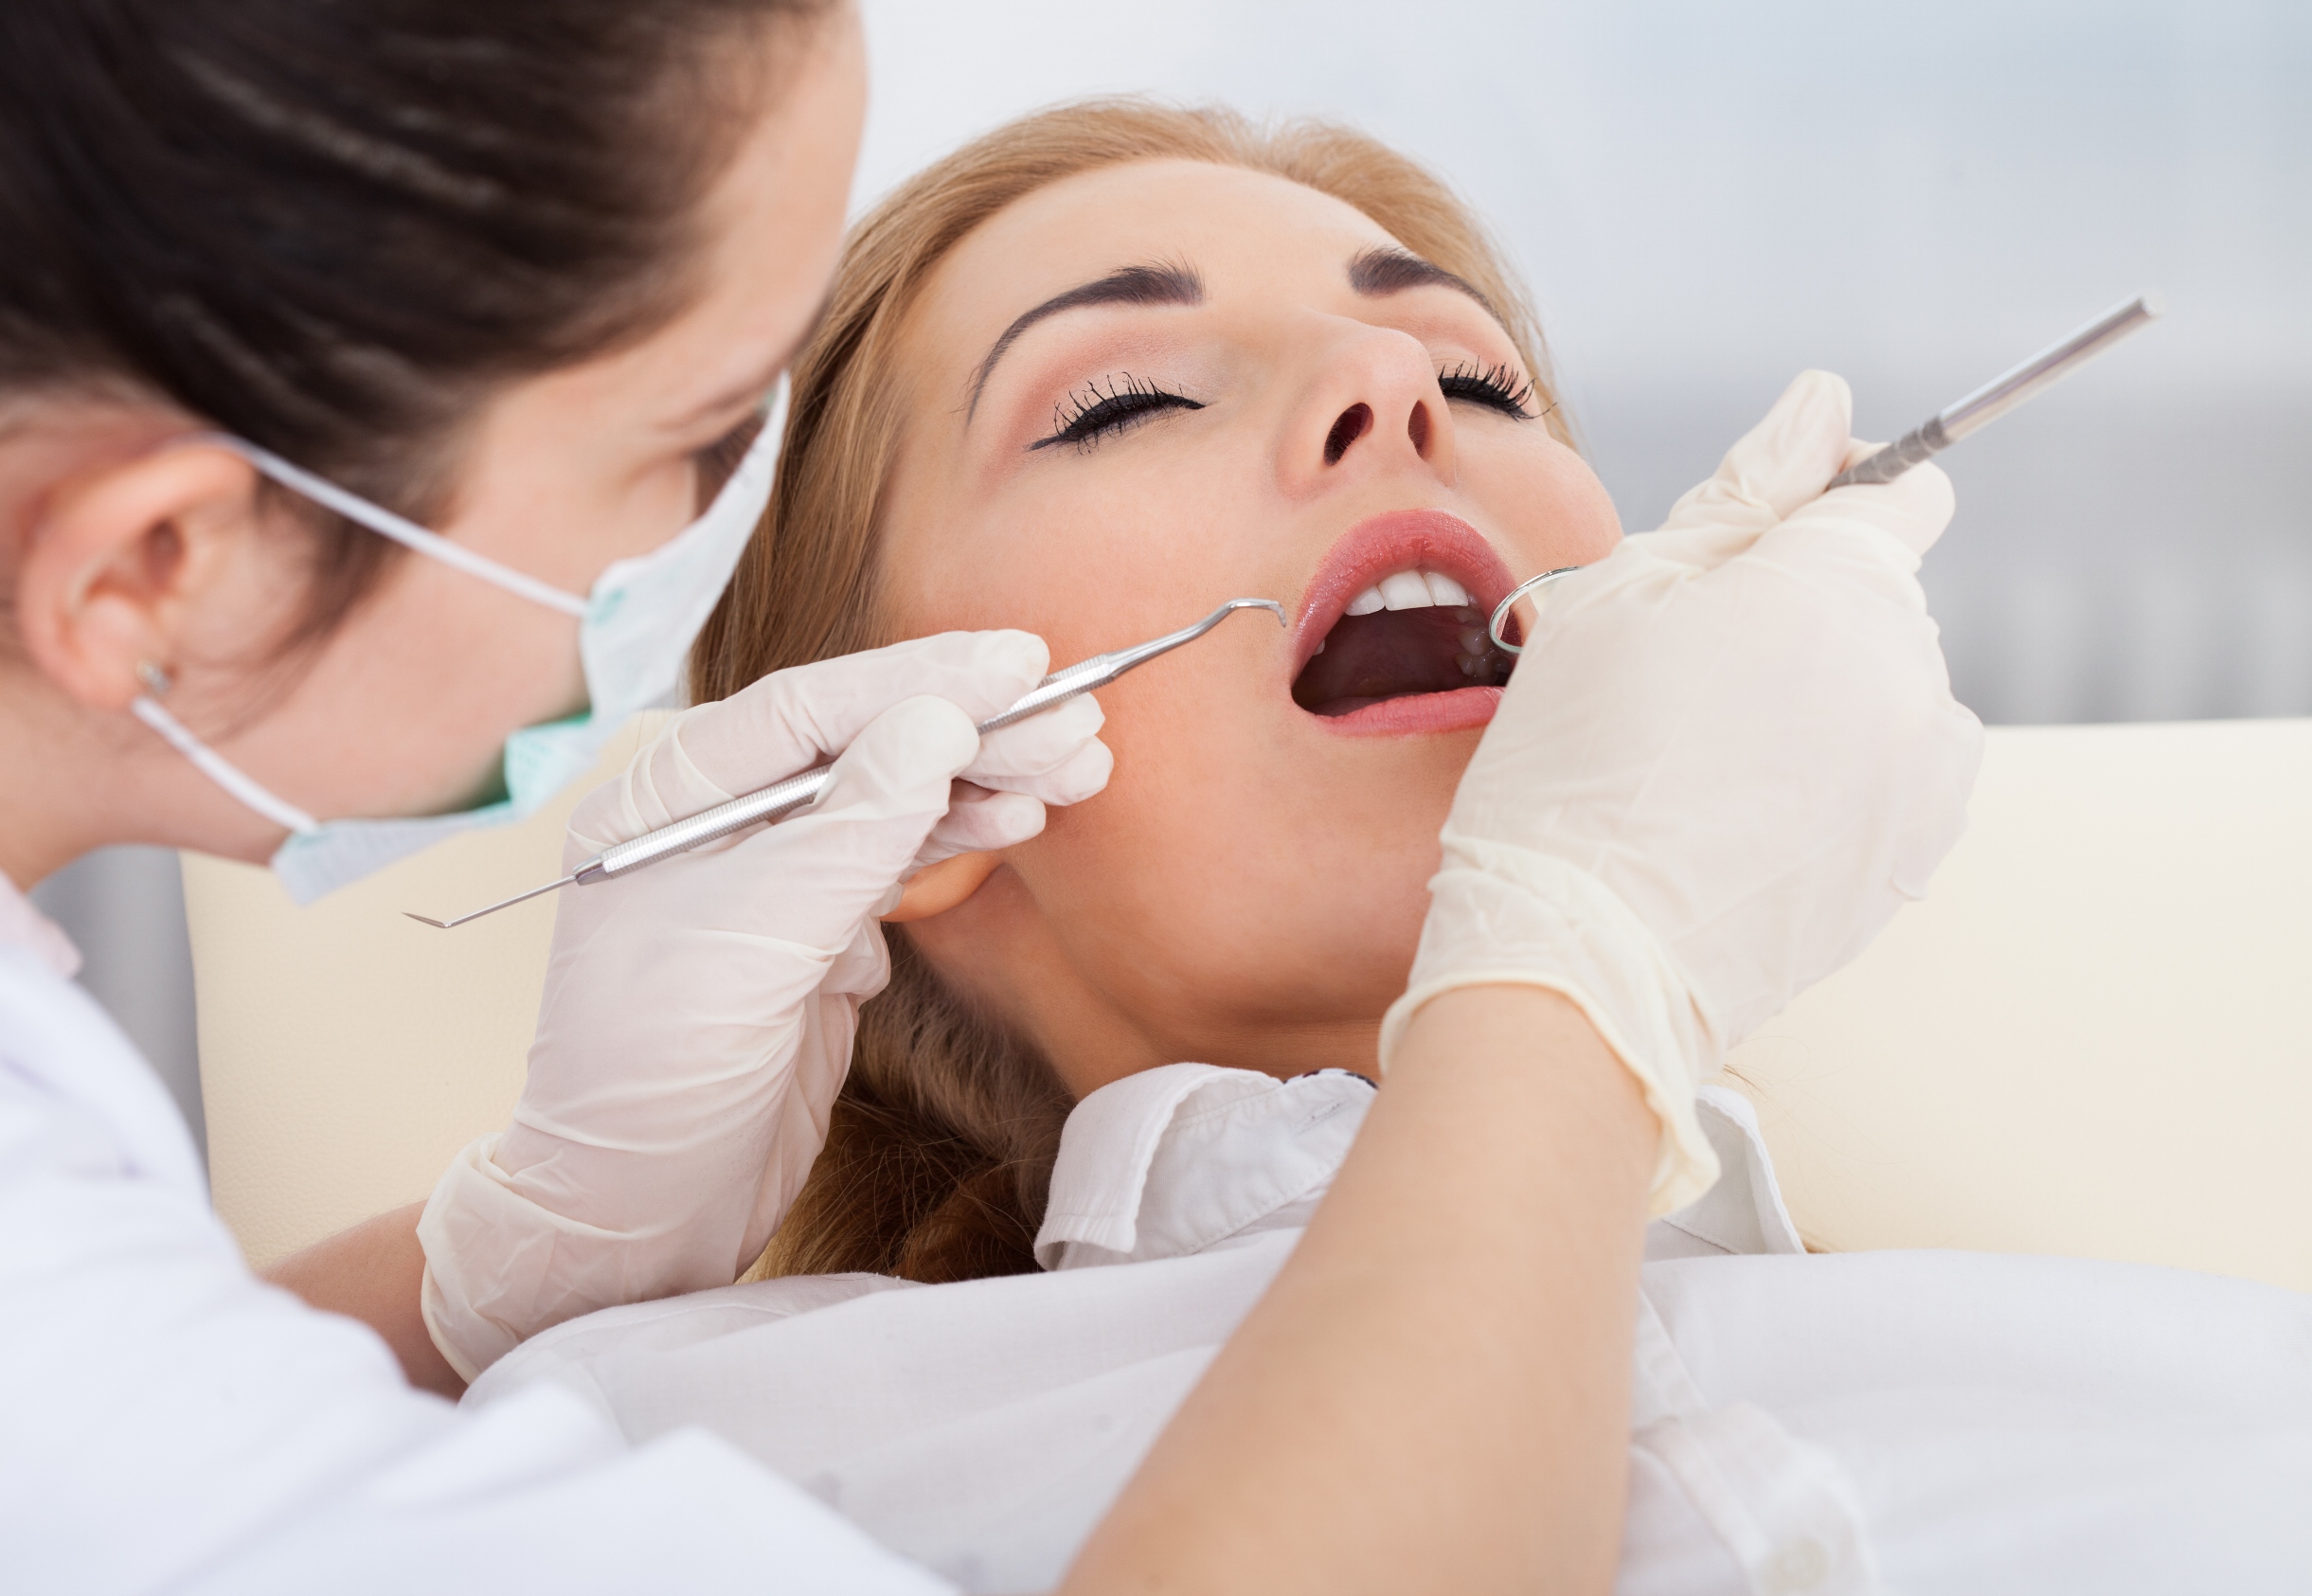 We are the experts of wisdom tooth removal in Sydney.